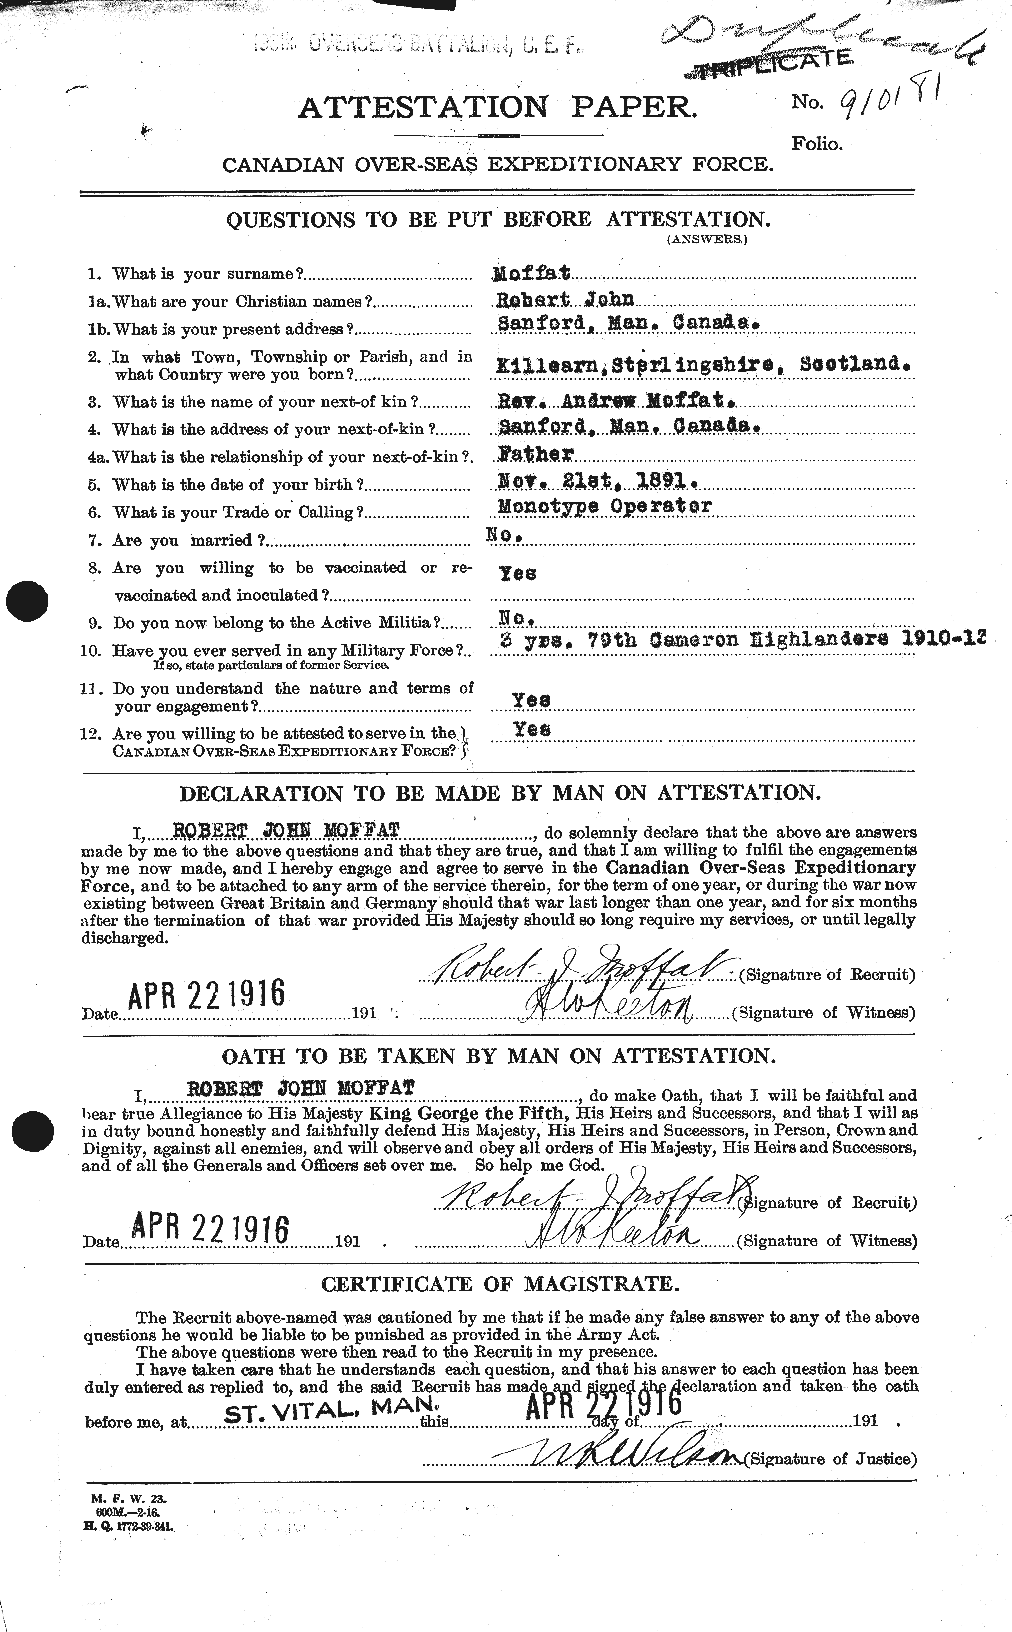 Personnel Records of the First World War - CEF 499069a